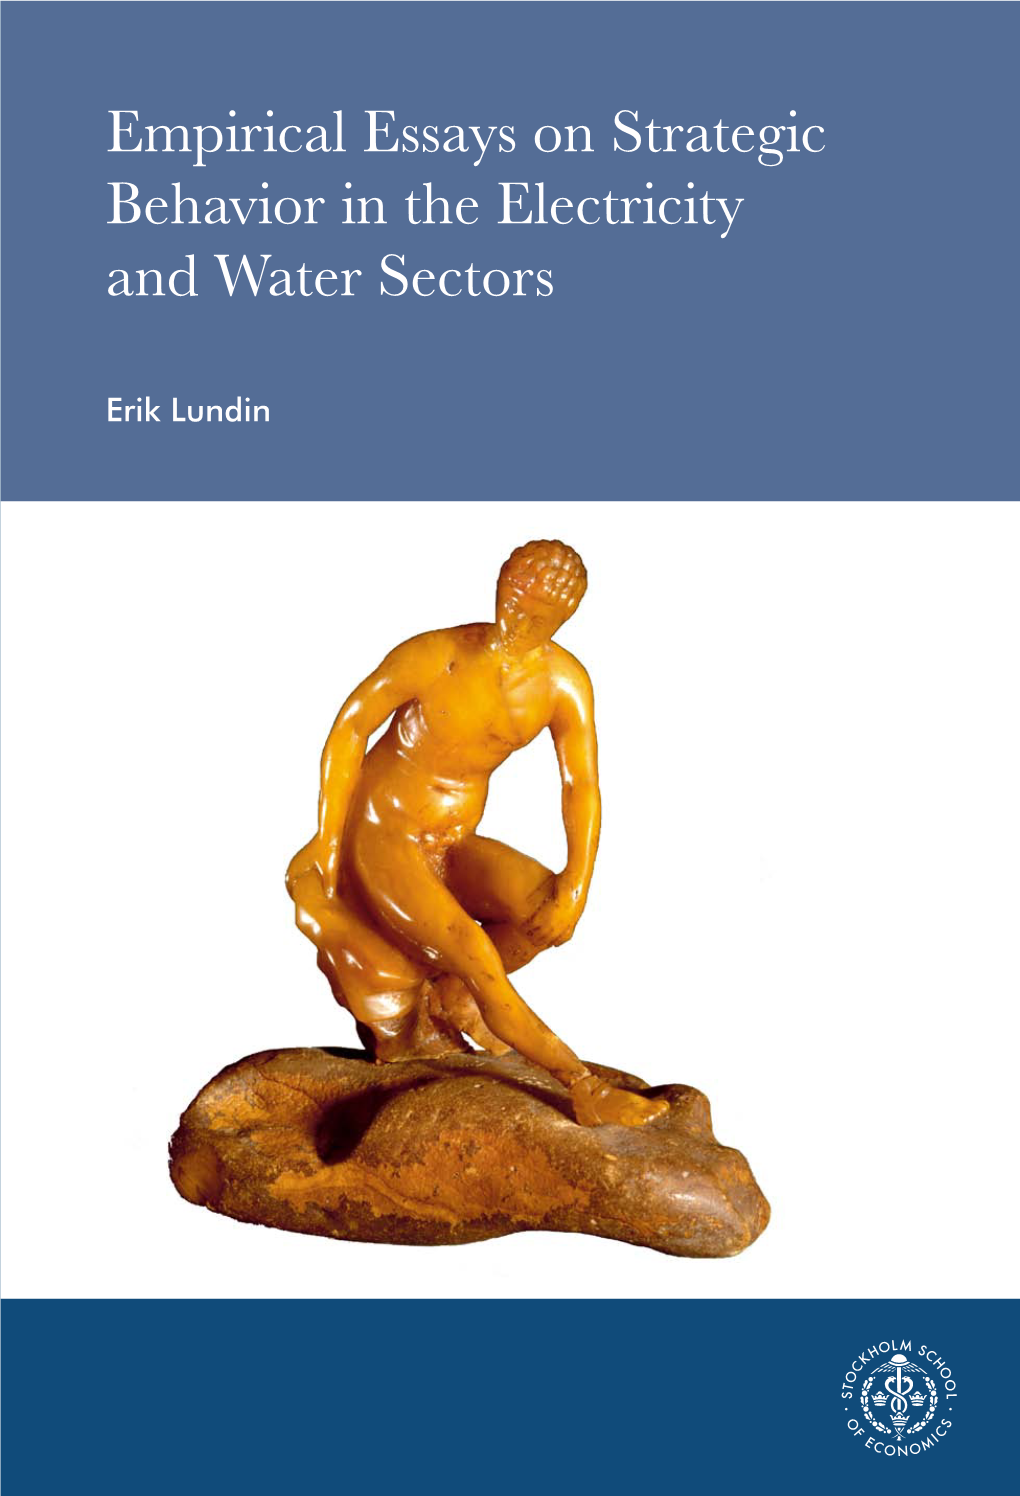 Empirical Essays on Strategic Behavior in the Electricity and Water Sectors Empirical Essays on Strategic Behavior in the Electricity and Water Sectors